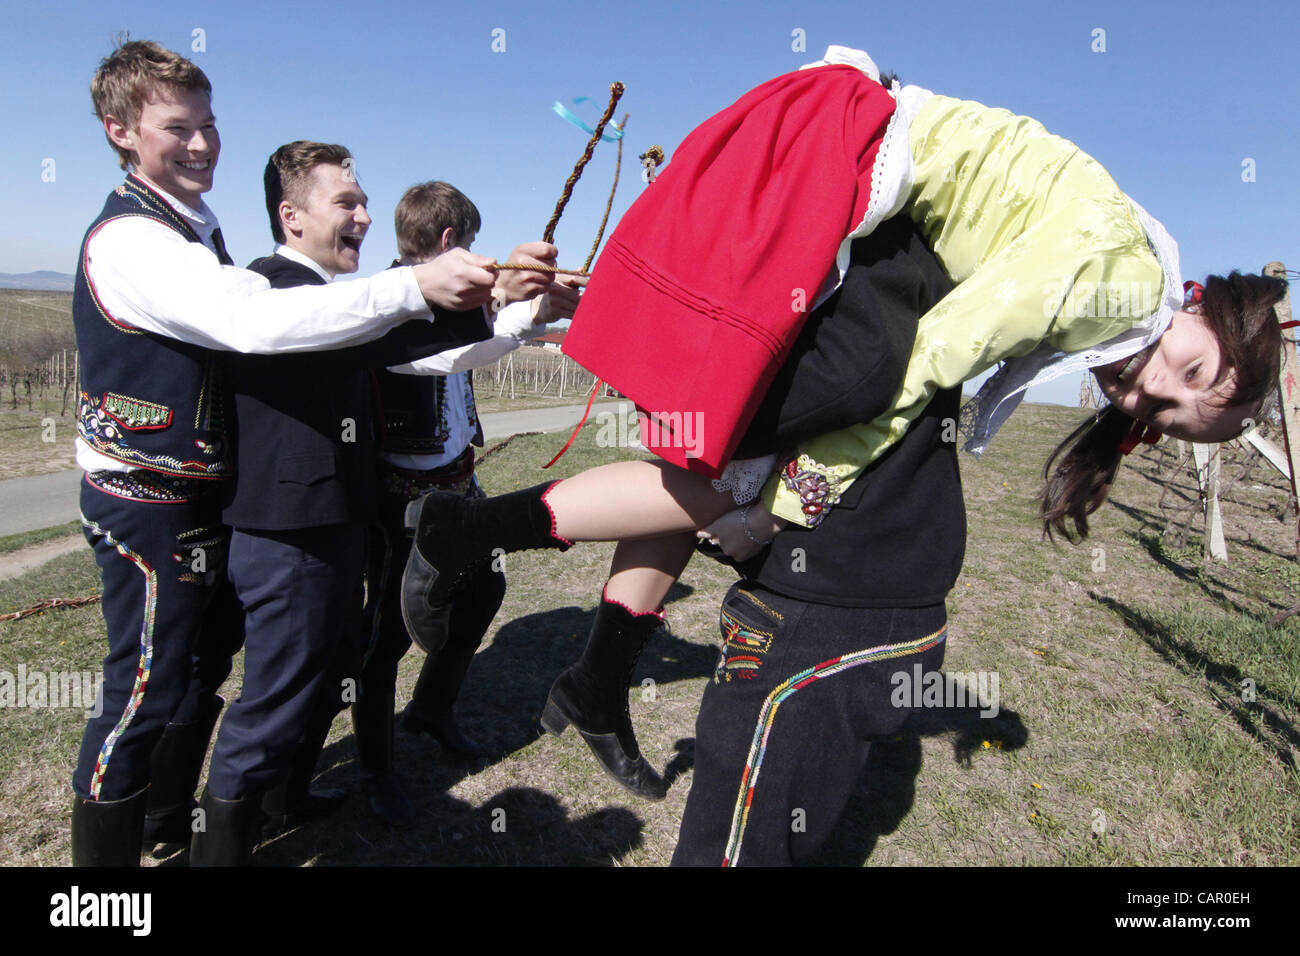 Boys in folk customs carry a giant "pomlazka" (plated willow stems) to whip girls during traditional celebration of Easter Monday in Nemcicky, South Moravia, on Monday, April 9, 2012. The tradition of whipping girls and women with plaited willow stems and splashing them with cold water should assure Stock Photo